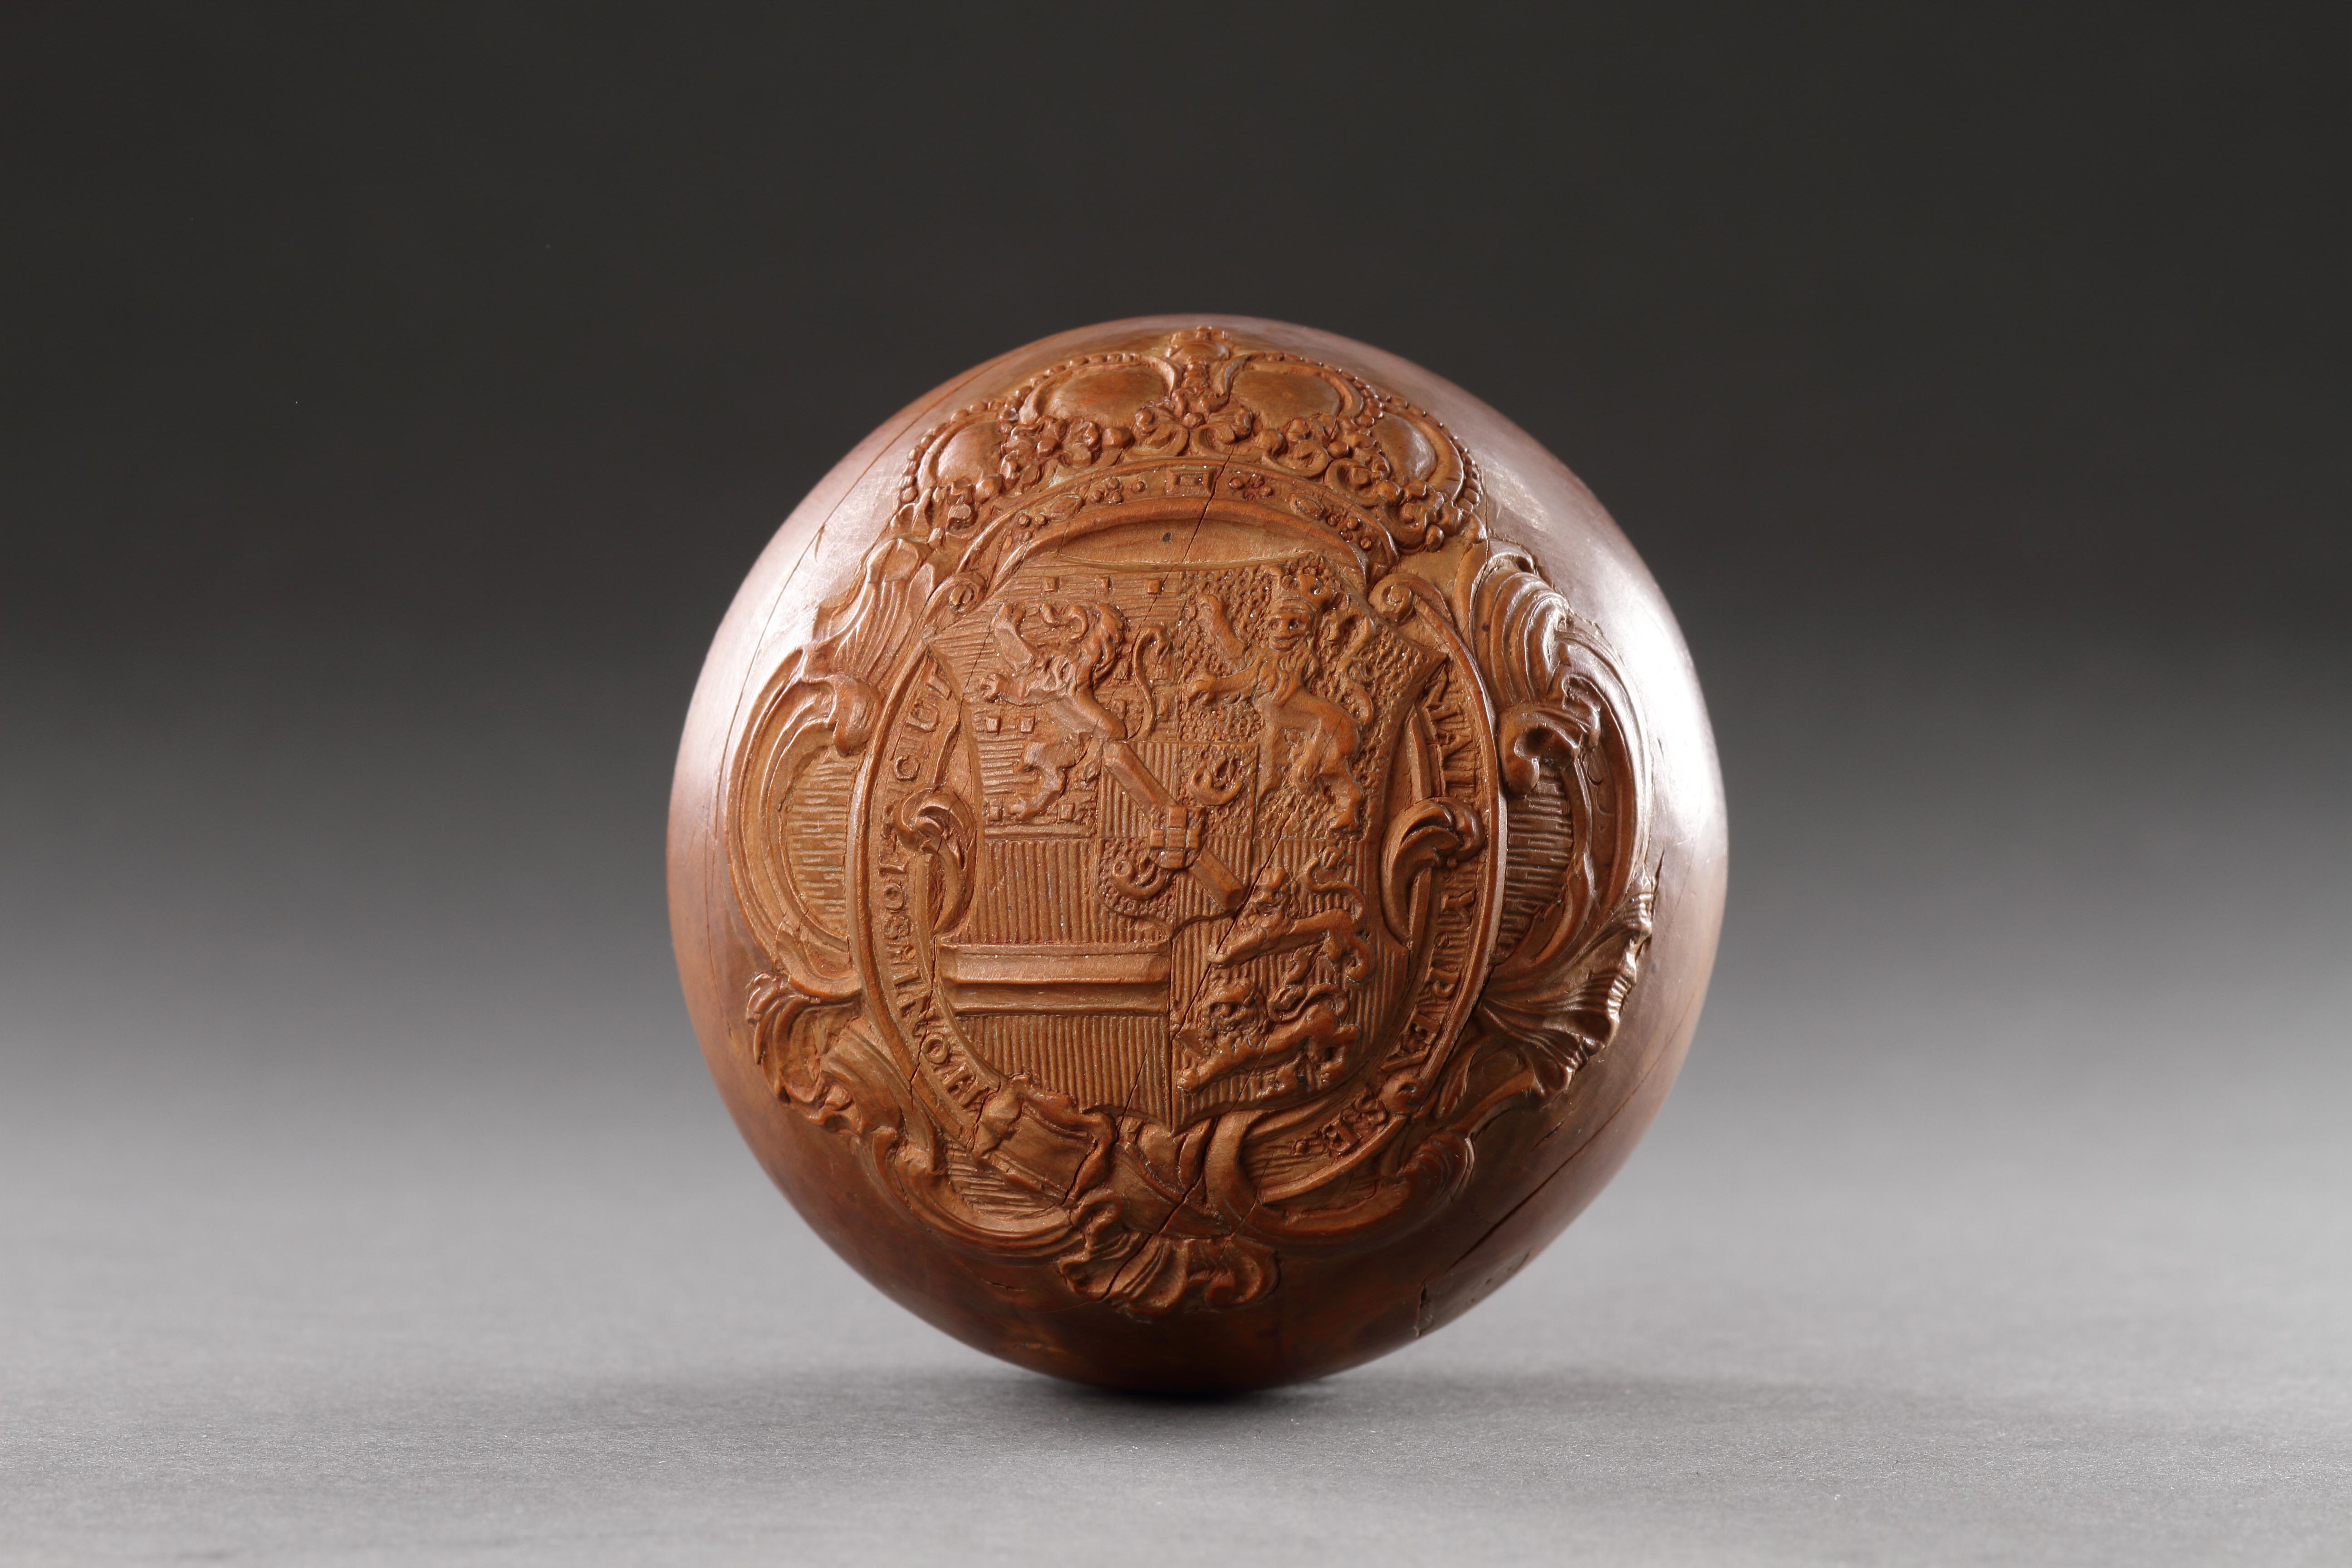 An Unusual Carved Boxwood ‘Sphere’
The circumference carved in low relief with the provinces of the Netherlands to one side and the National Arms to the opposite side
Boxwood
The Netherlands
Late 17th or Early 18th Century

SIZE: 8cm dia. - 3³⁄₈ ins